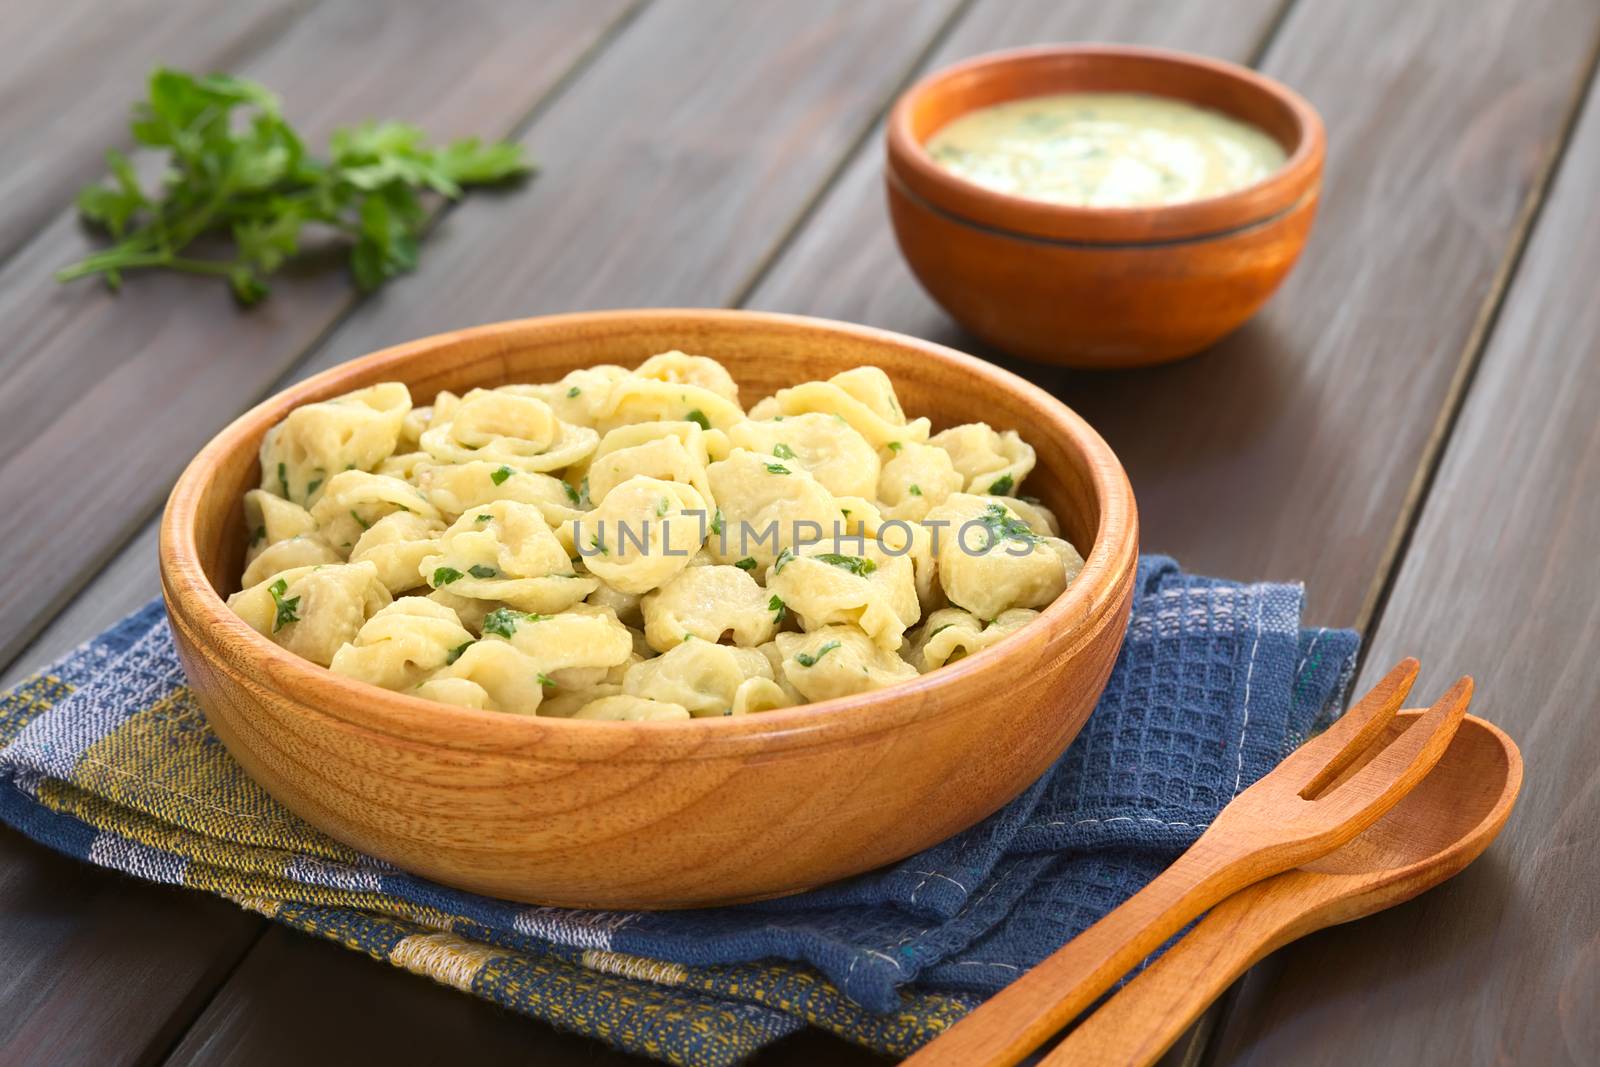 Cooked tortellini stuffed with cheese served with parsley cream sauce in wooden bowl, photographed on dark wood with natural light (Selective Focus, Focus one third into the dish)